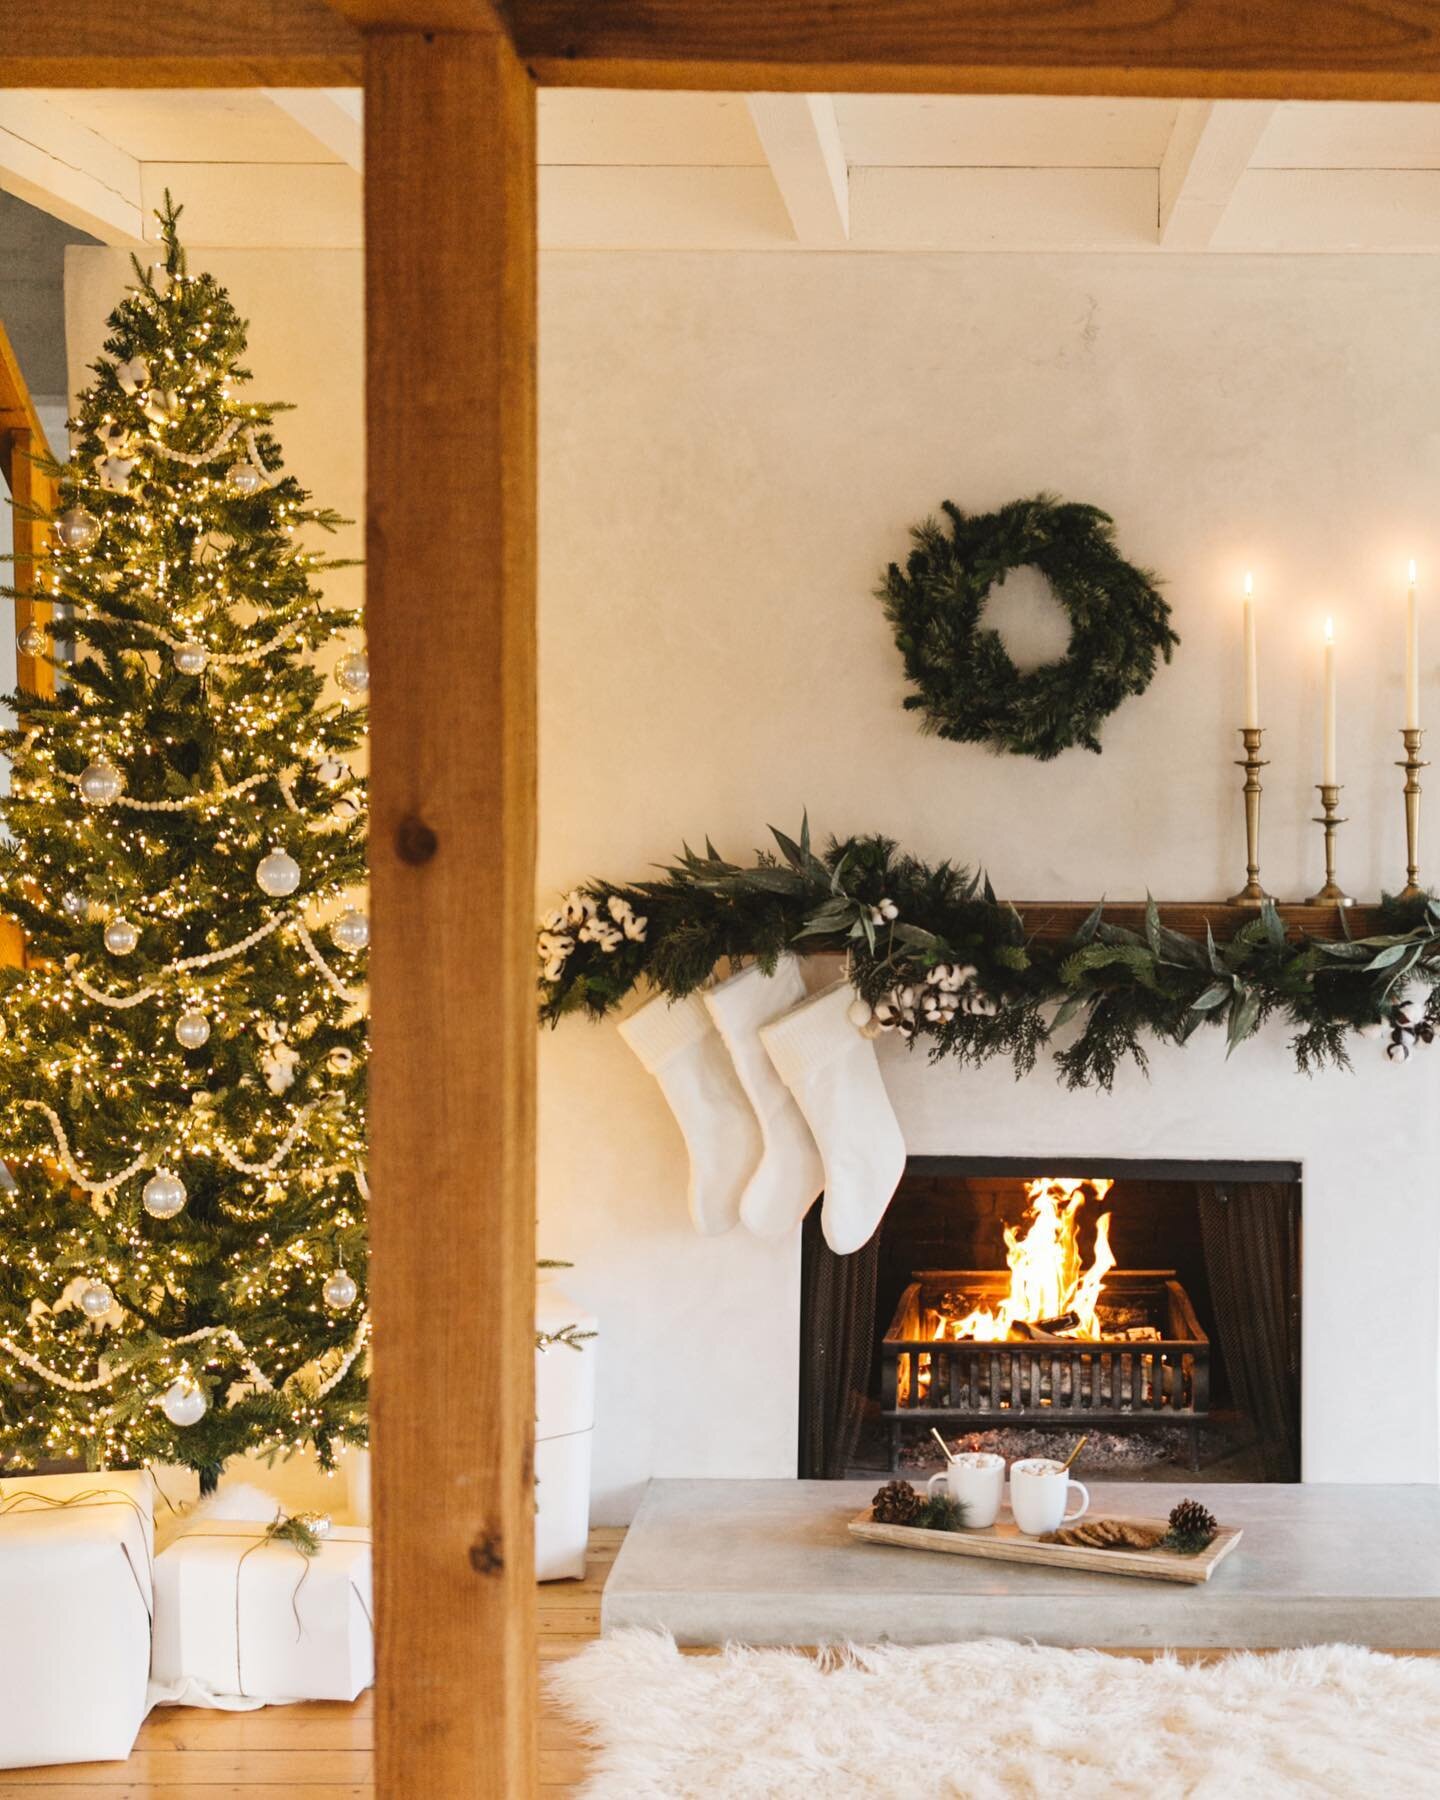 Christmas came early to the Westby home and we are not mad about it.✨ #Sponsored Everything from the magical tree, cozy rug, gold candle stick holders, garlands, wreaths, stockings, ornaments, and wood tray are all from @athomestores . They have one 